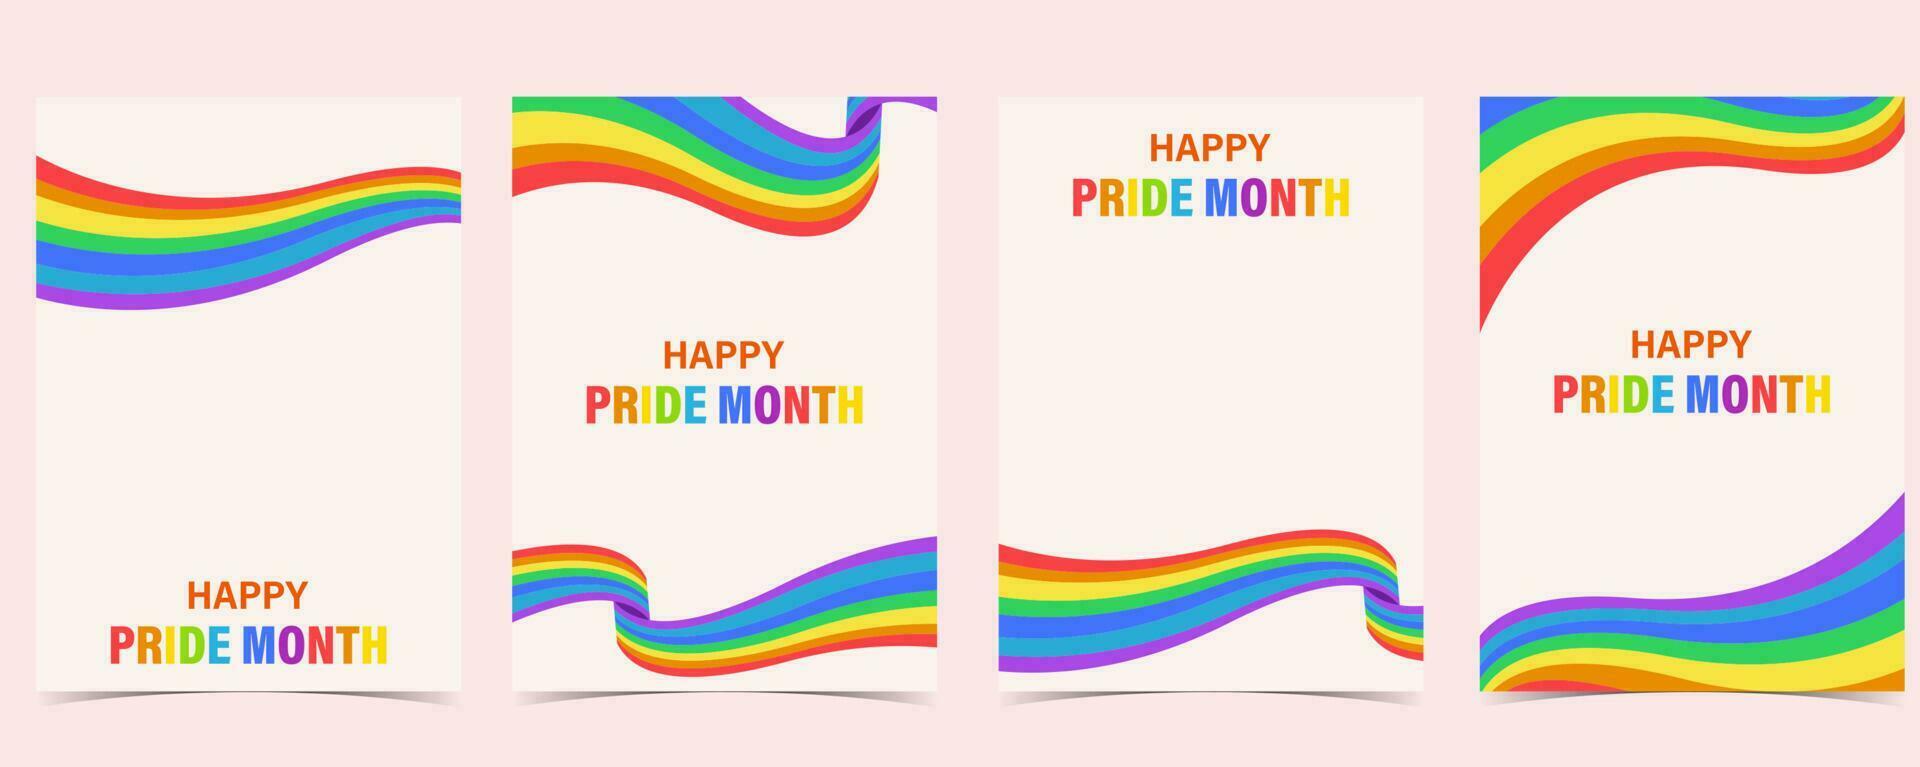 Pride month day background with curve and flag for postcard social media vector